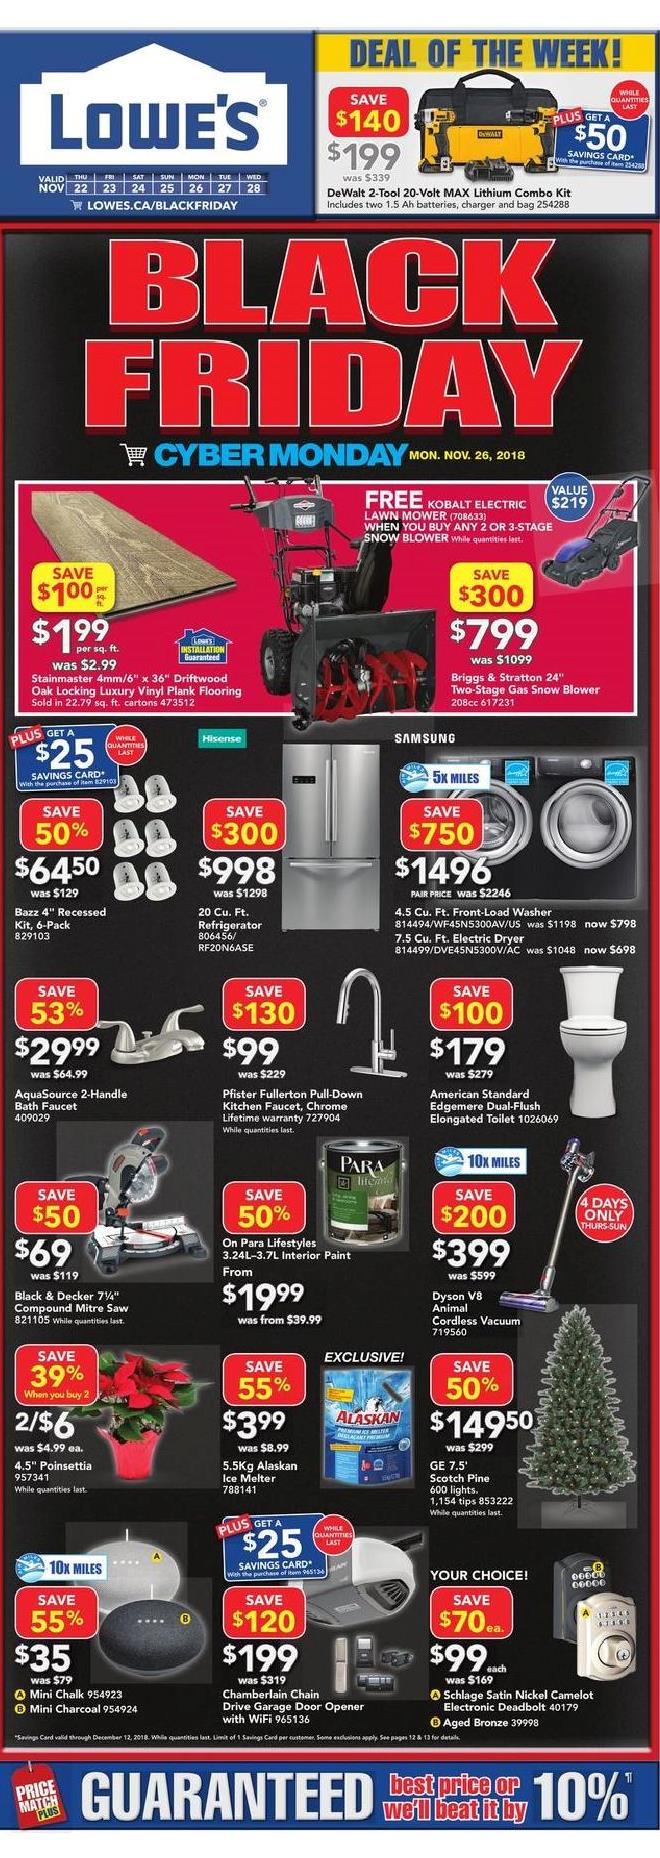 Lowe's Black Friday Canada 2018 Sale Flyer - What Sales Are Going On For Black Friday